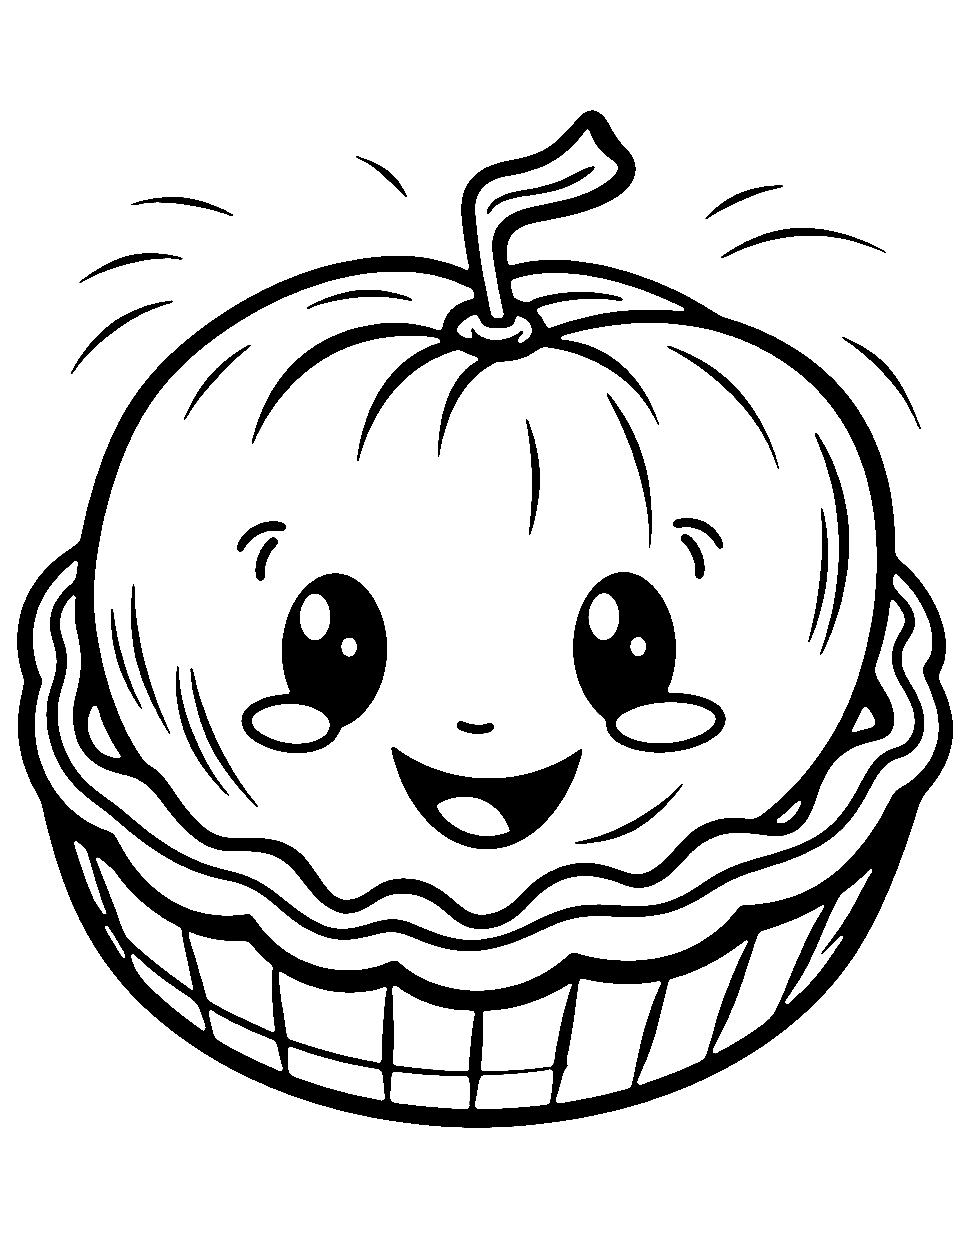 A Cute Pumpkin  Food Coloring Page - A cute pumpkin with a smiling face.